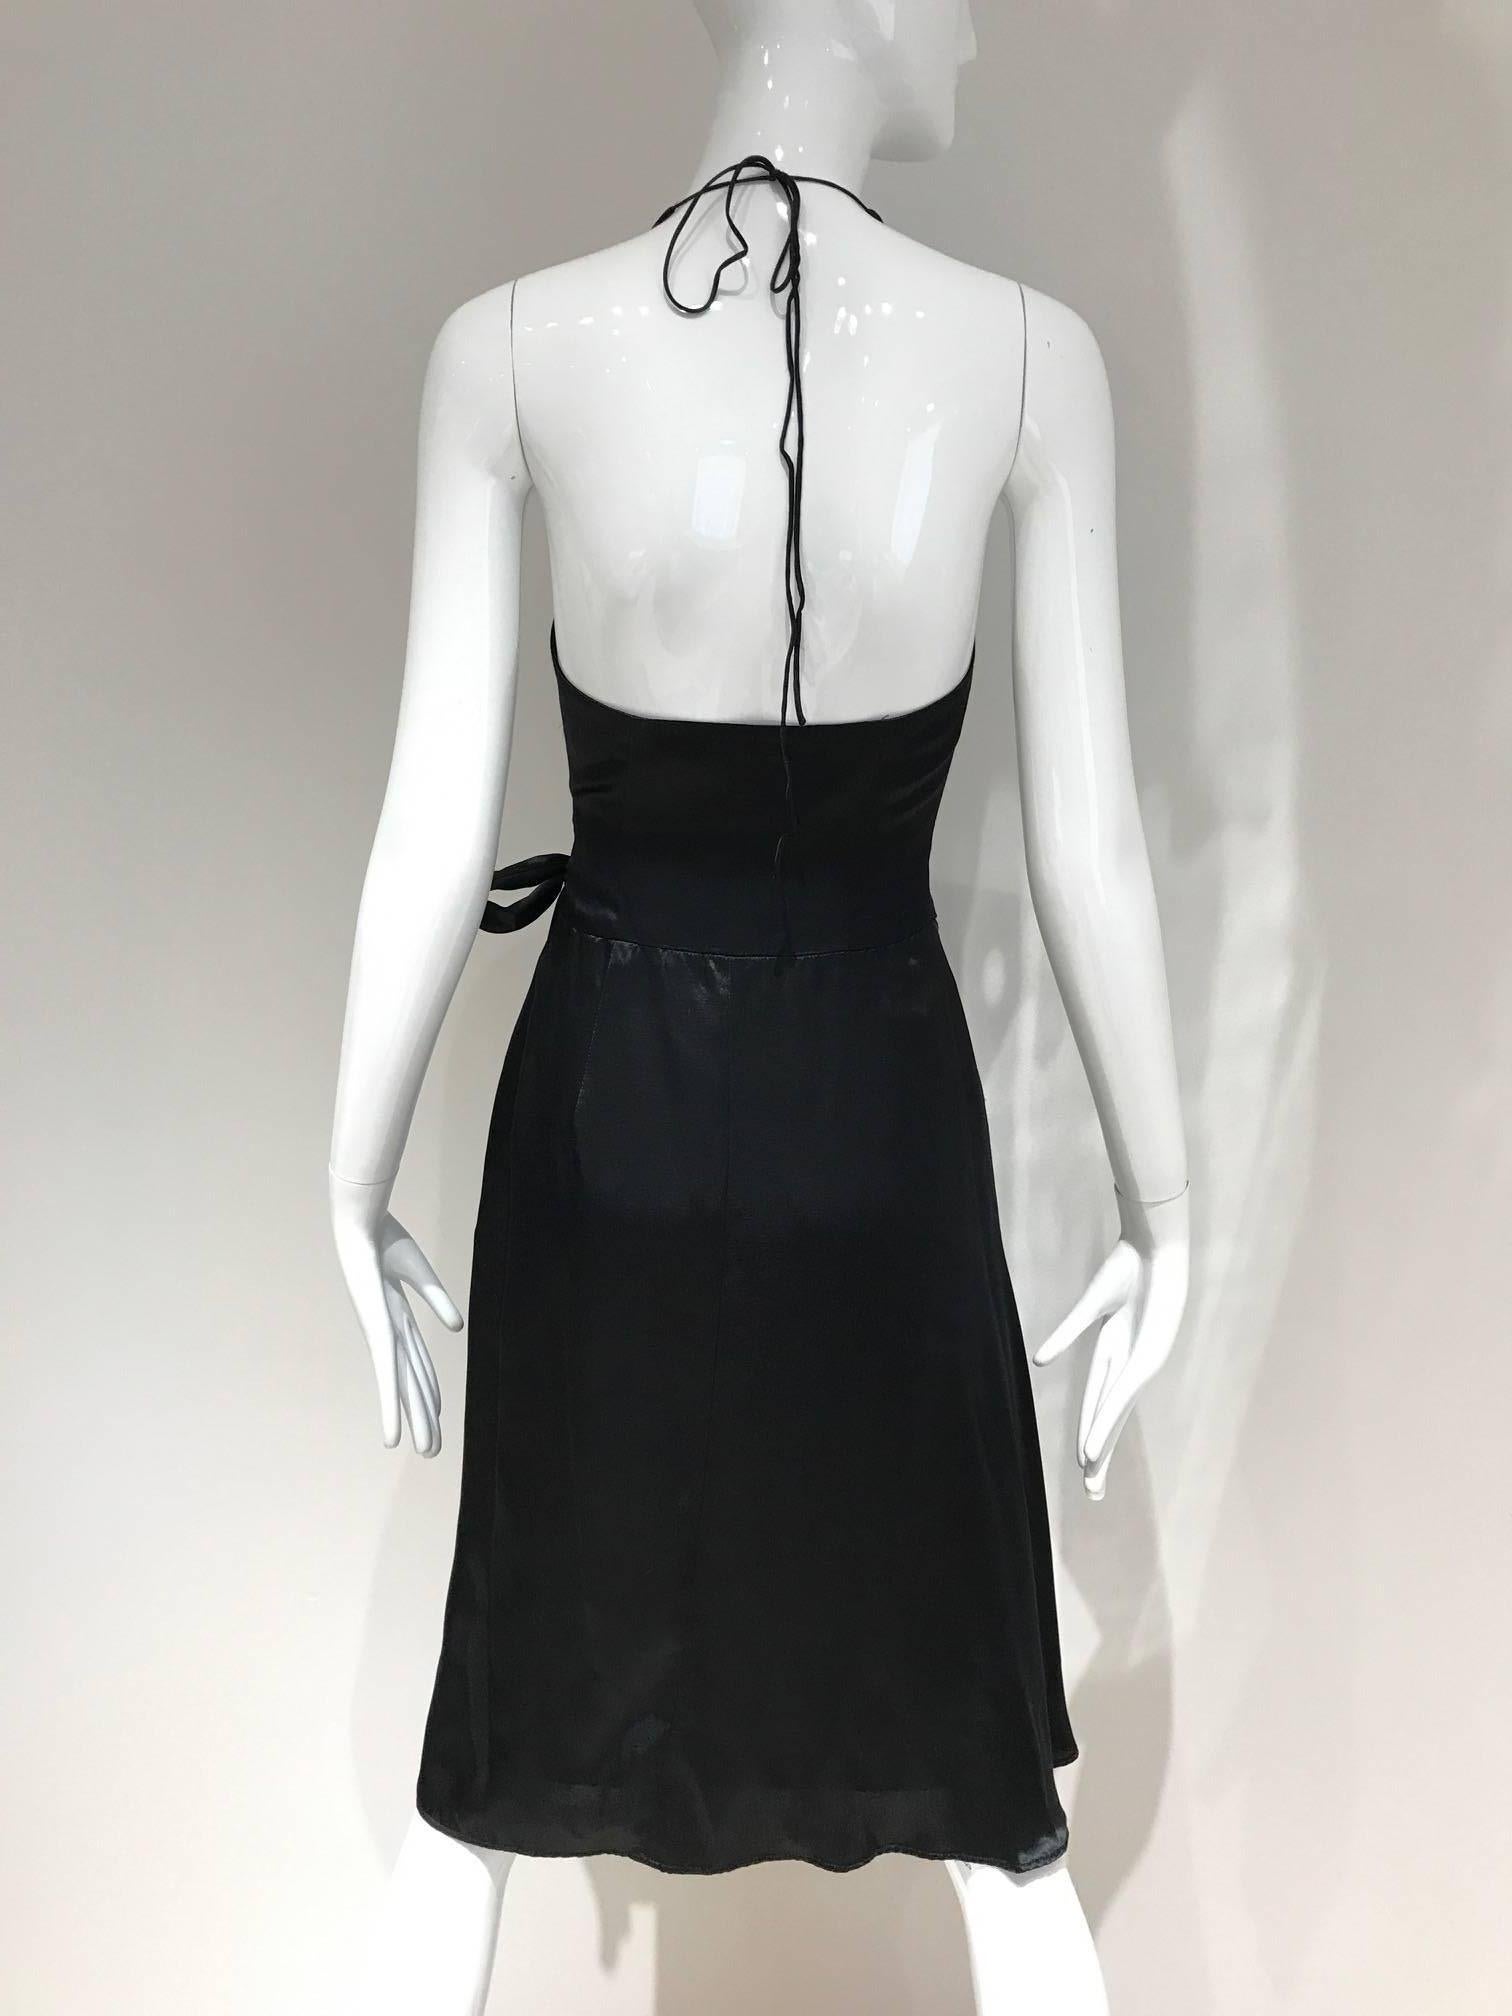 Sexy Vintage Vivienne Westwood wrap halter dress. 
Size: 2/4. Small
Bust: 32 inch / Waist: 26 inch
**** This Garment has been professionally Dry Cleaned and Ready to wear.

